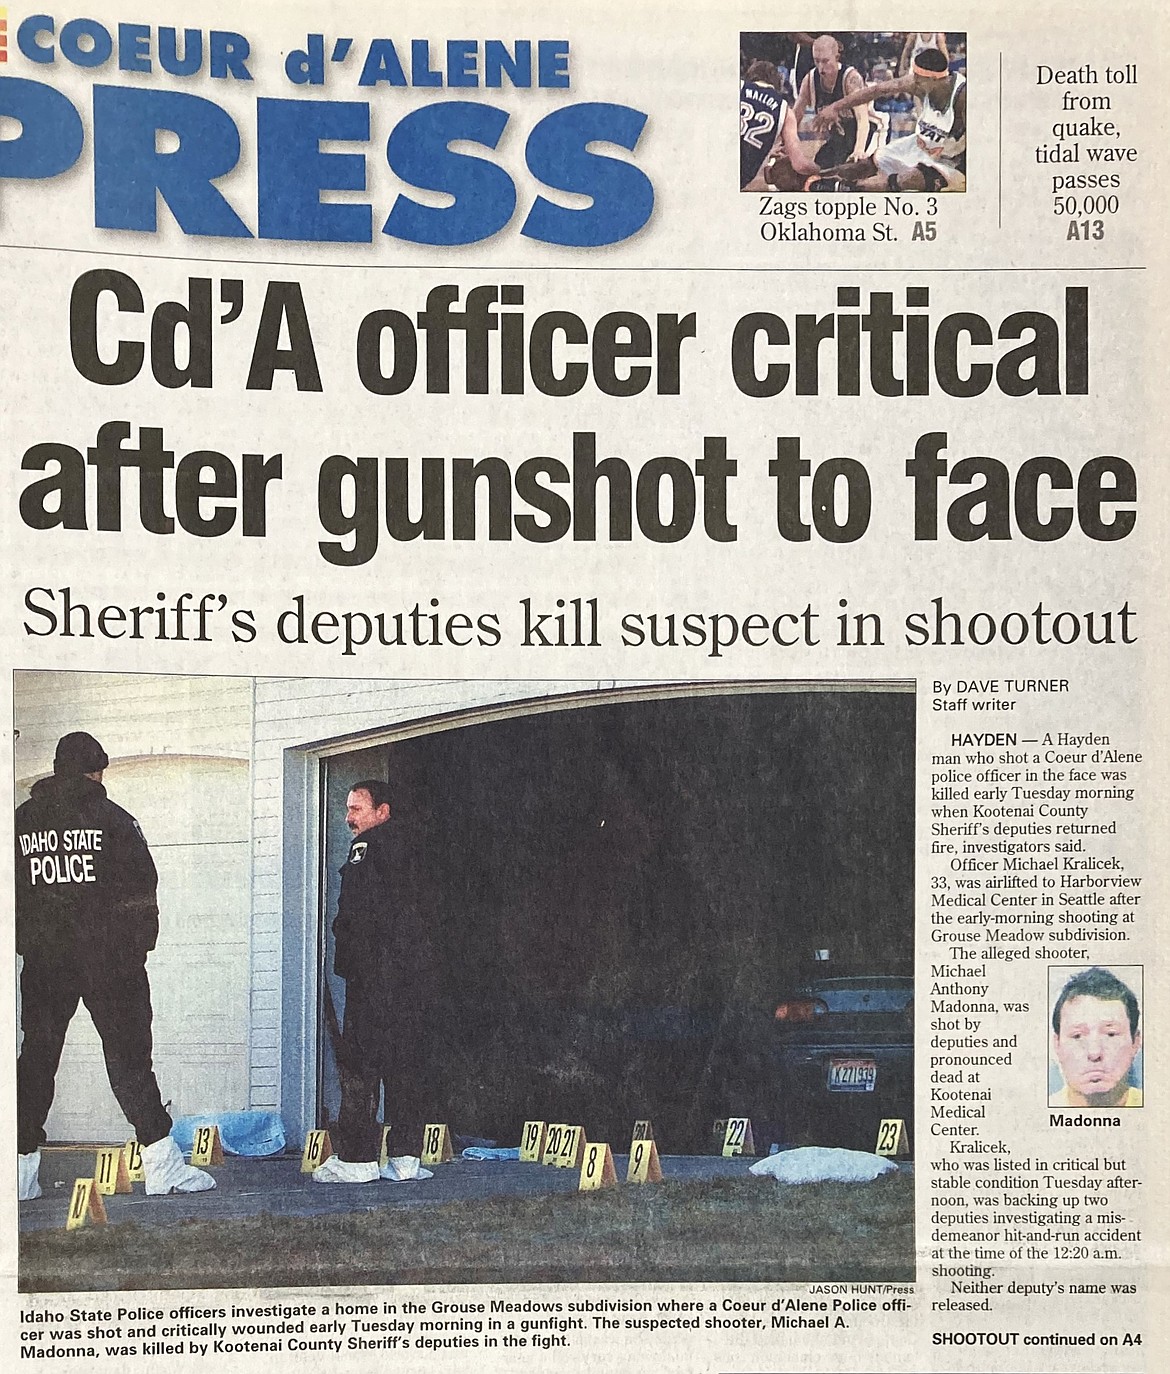 On Dec. 29, 2004, The Press carried news of the terrible shooting.